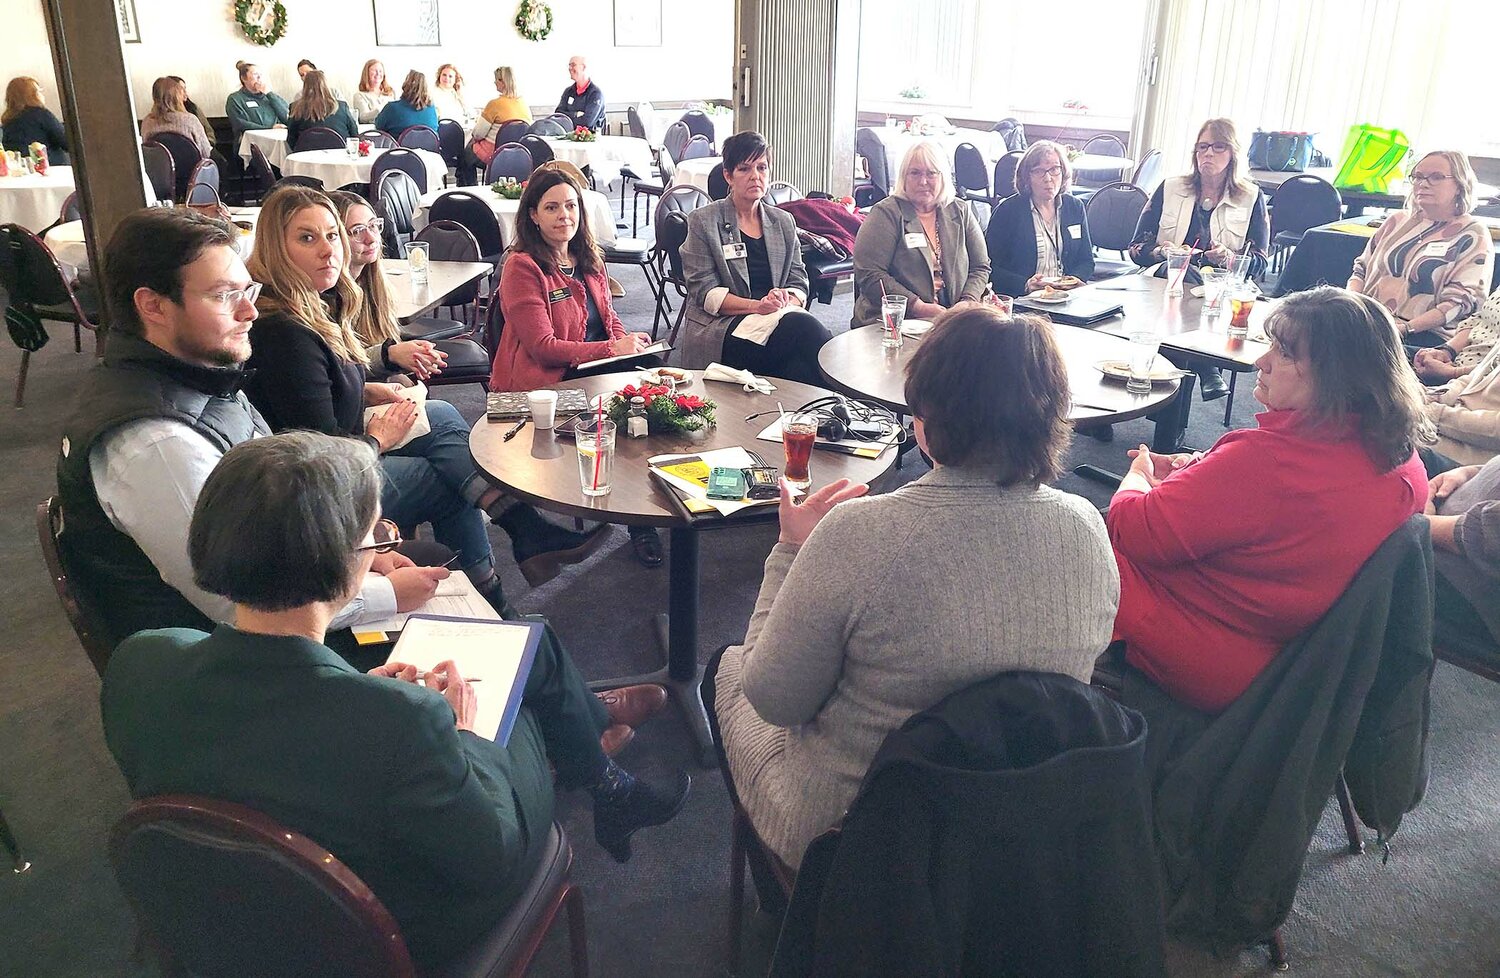 A group breakout session was part of Wednesday's public health forum at the Elks Lodge in downtown Fort Madison. The forum was hosted by the University of Iowa's College of Public Health and looked at ways to help create a healthier workforce and make local jobs more attractive to families.